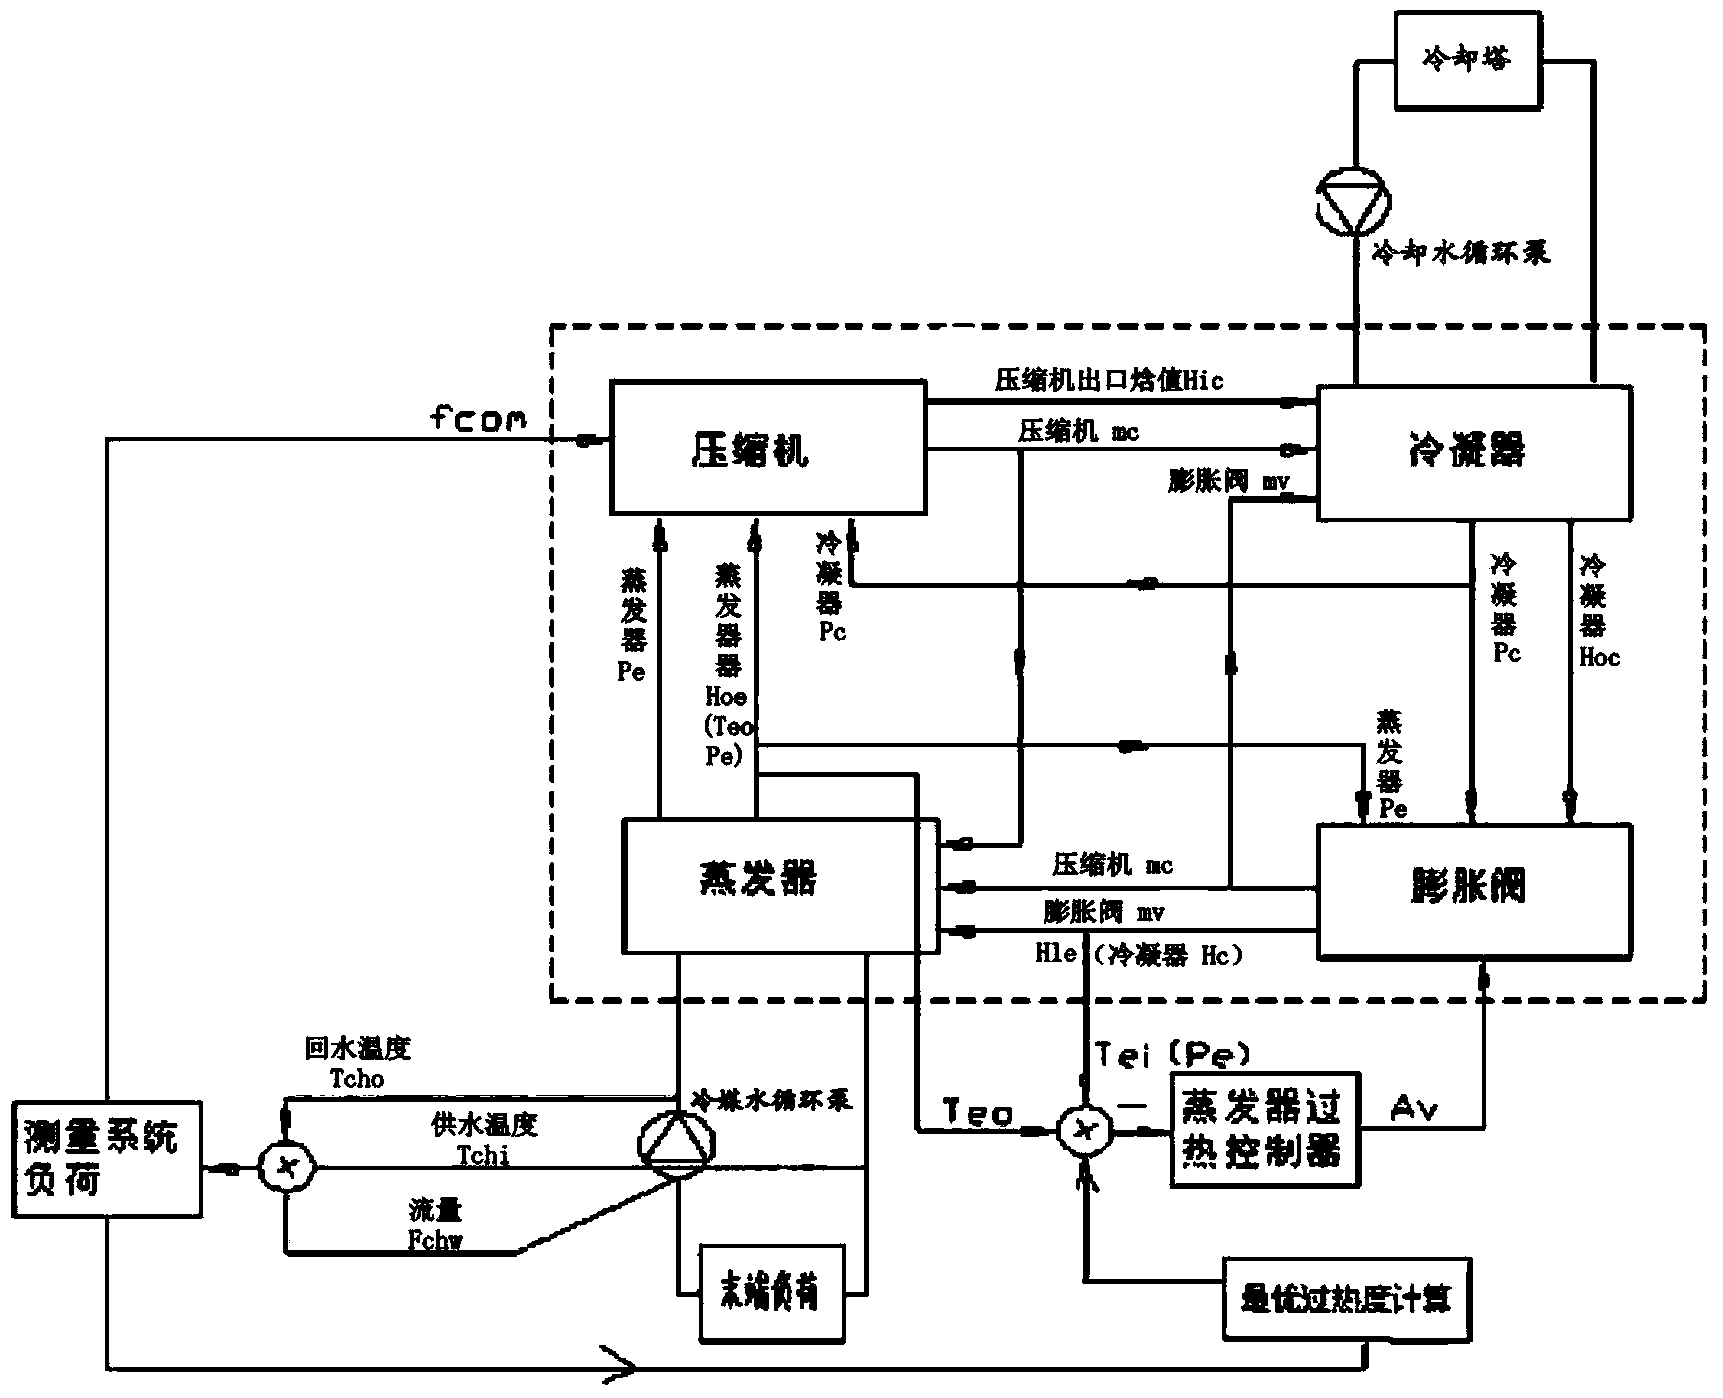 Data drive control method for minimum energy consumption of refrigerating system on basis of SPSA